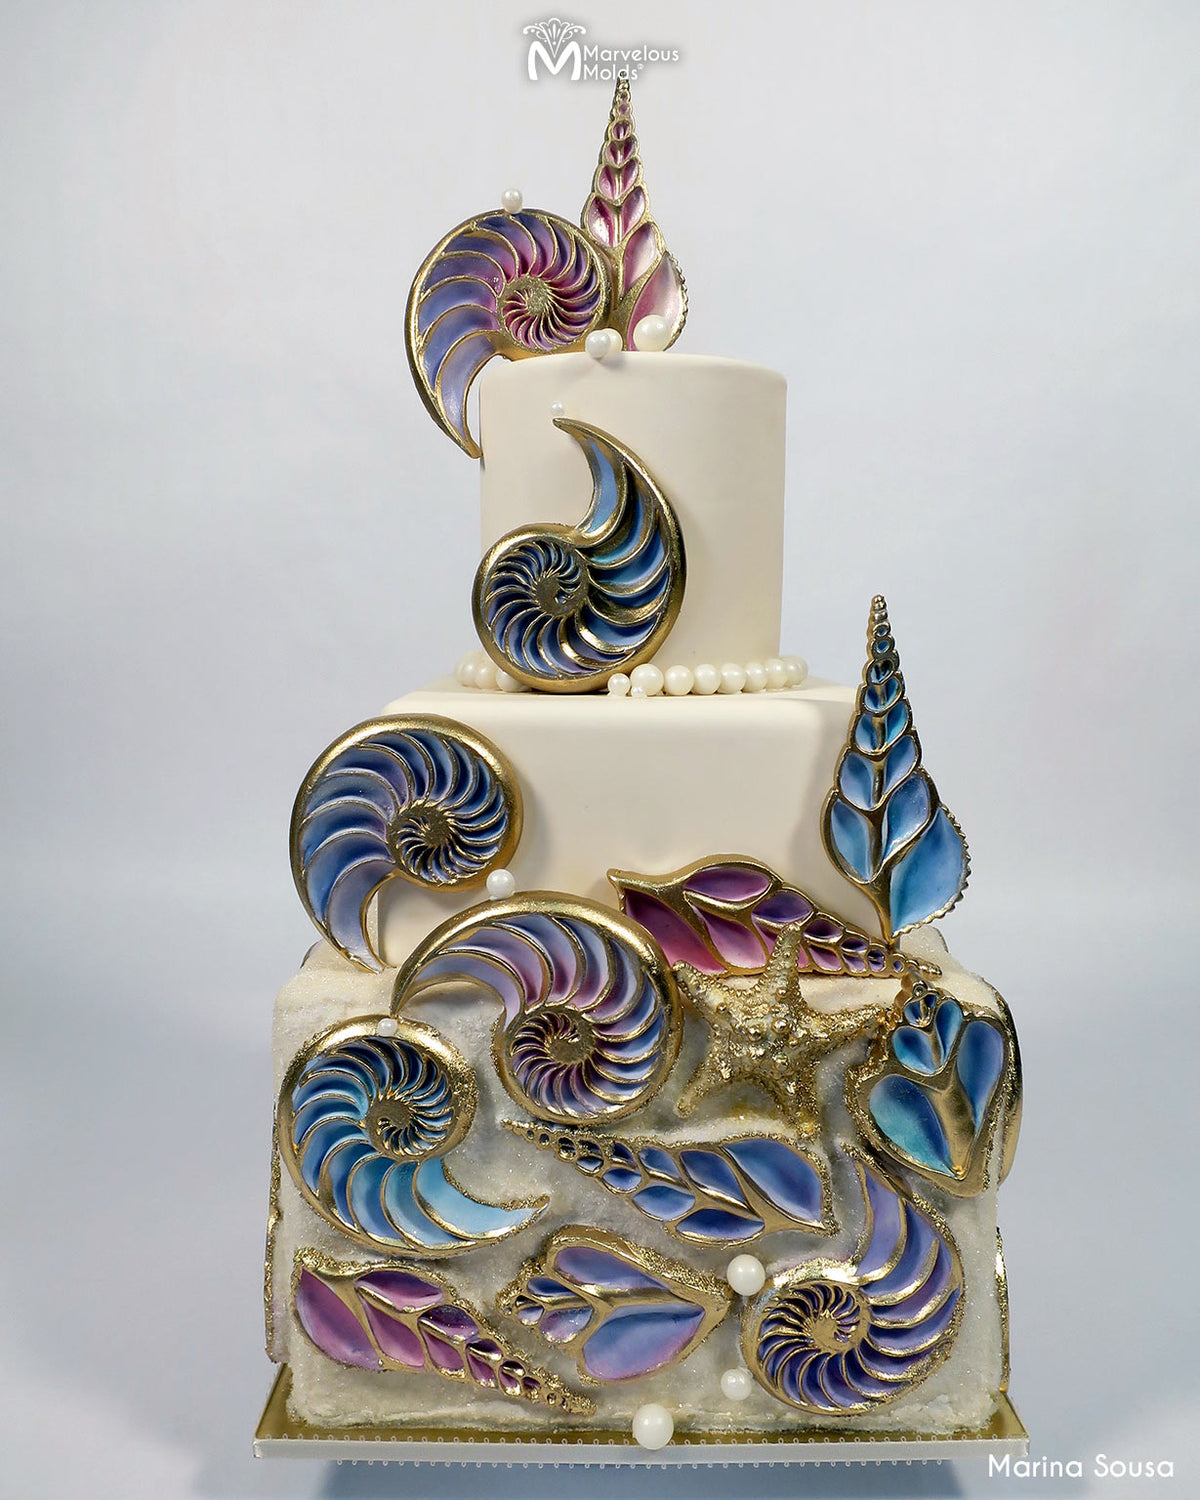 Colorful Seashell Wedding Cake Decorated using Marvelous Molds Cross-Cut Turret Shell Mold